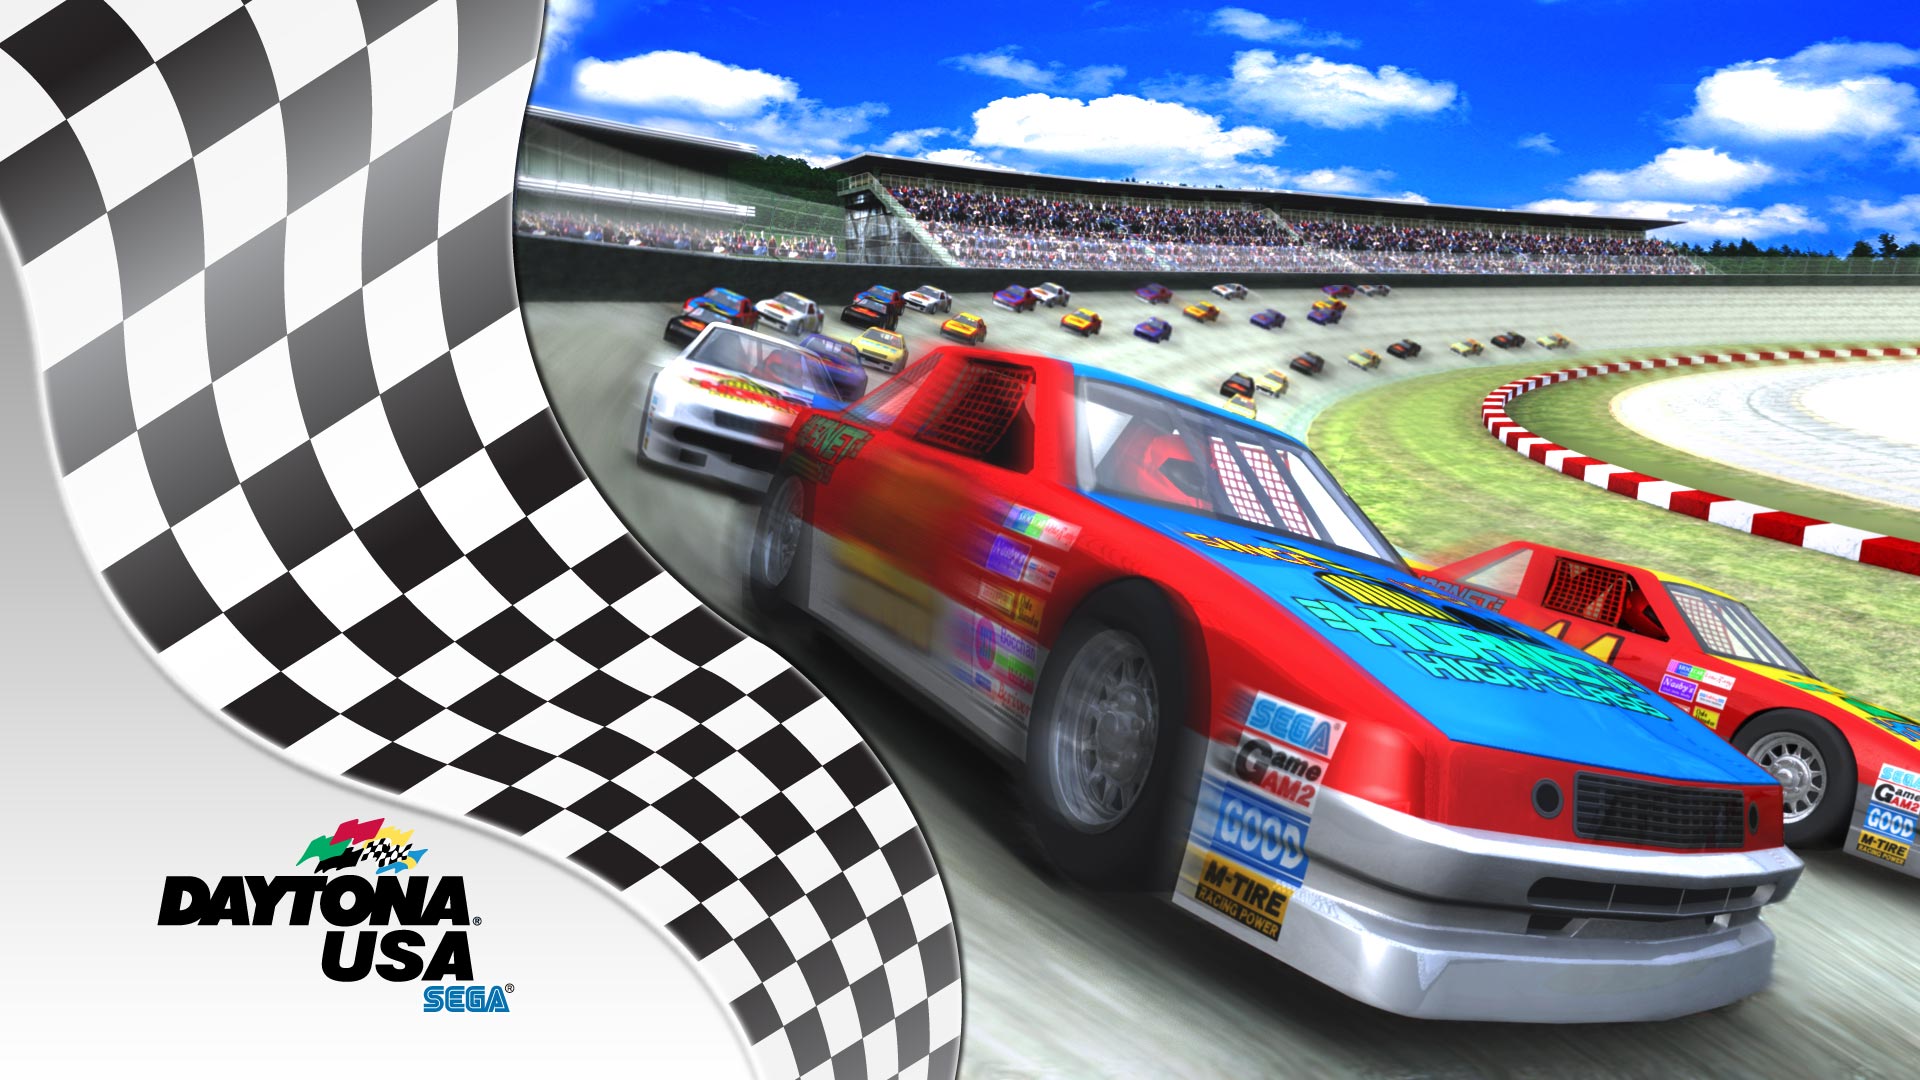 Re Daytona Usa Xbla Psn Your Time Has Been Extended